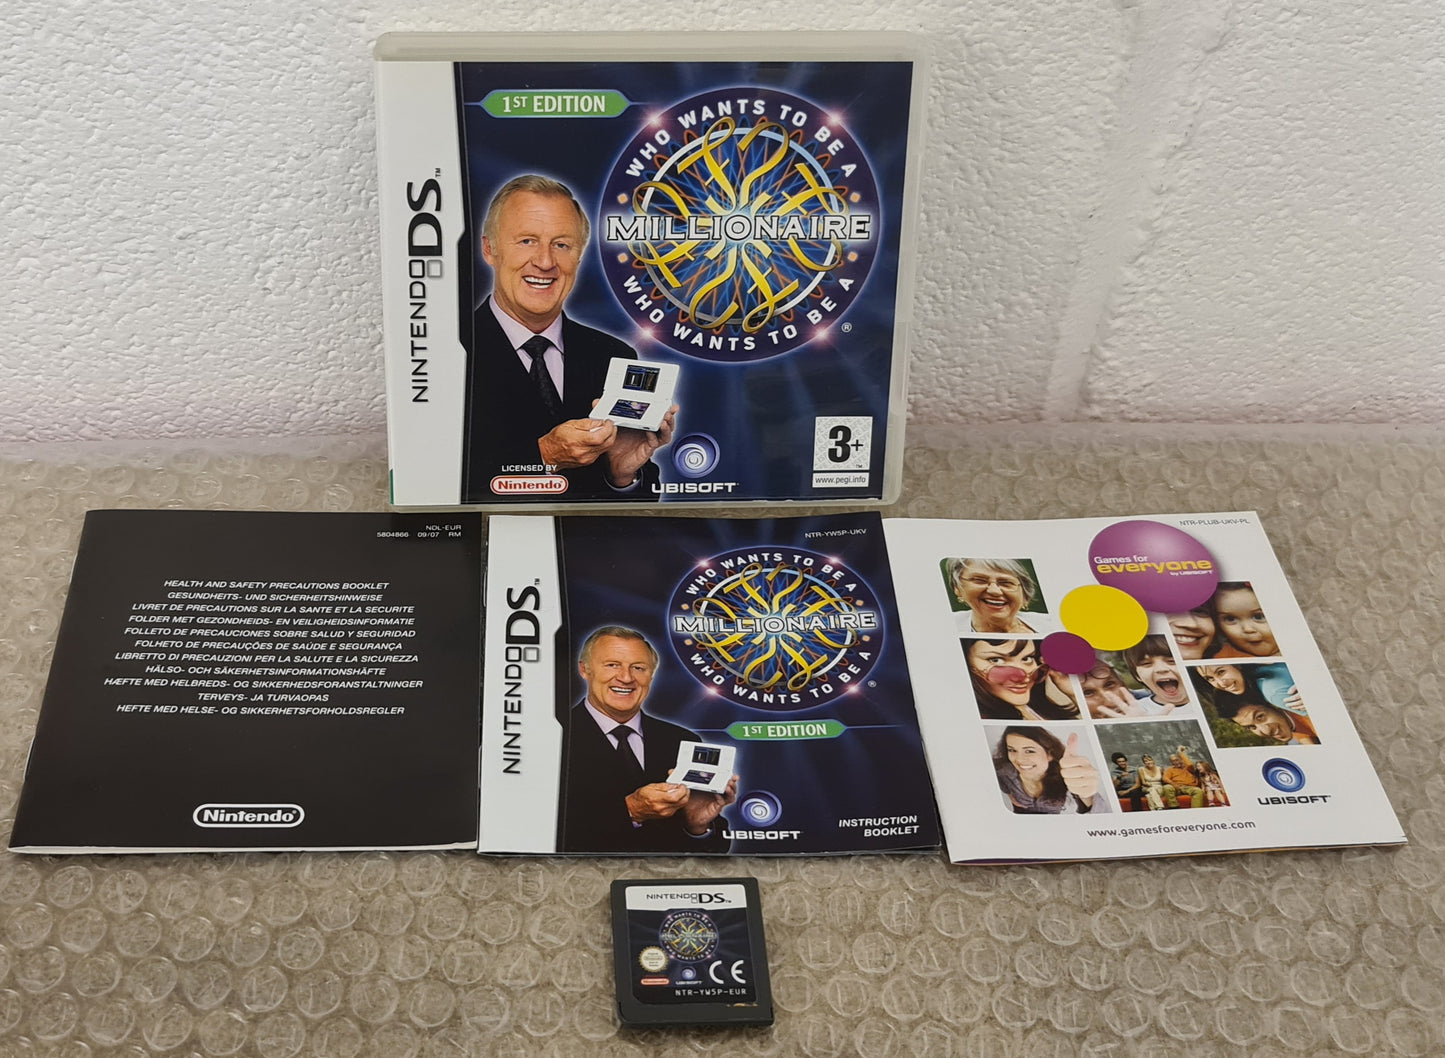 Who Wants to be a Millionaire? 1st Edition Nintendo DS Game